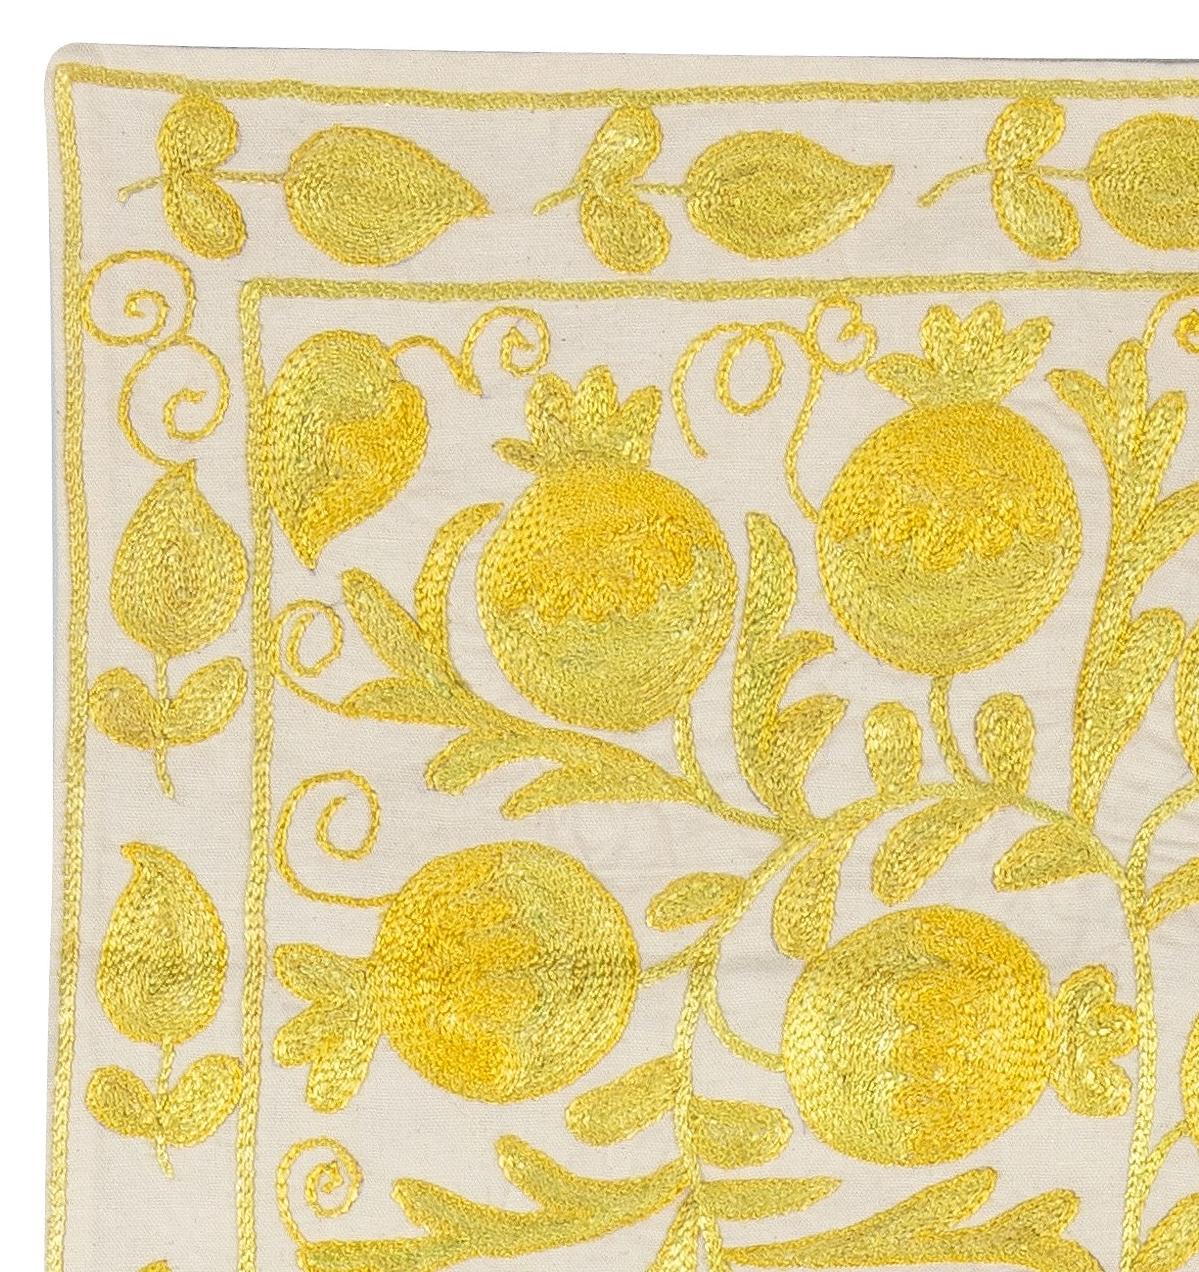 Embroidered 17x17 inches Decorative Silk Hand Embroidery Suzani Cushion Cover Ivory & Yellow For Sale